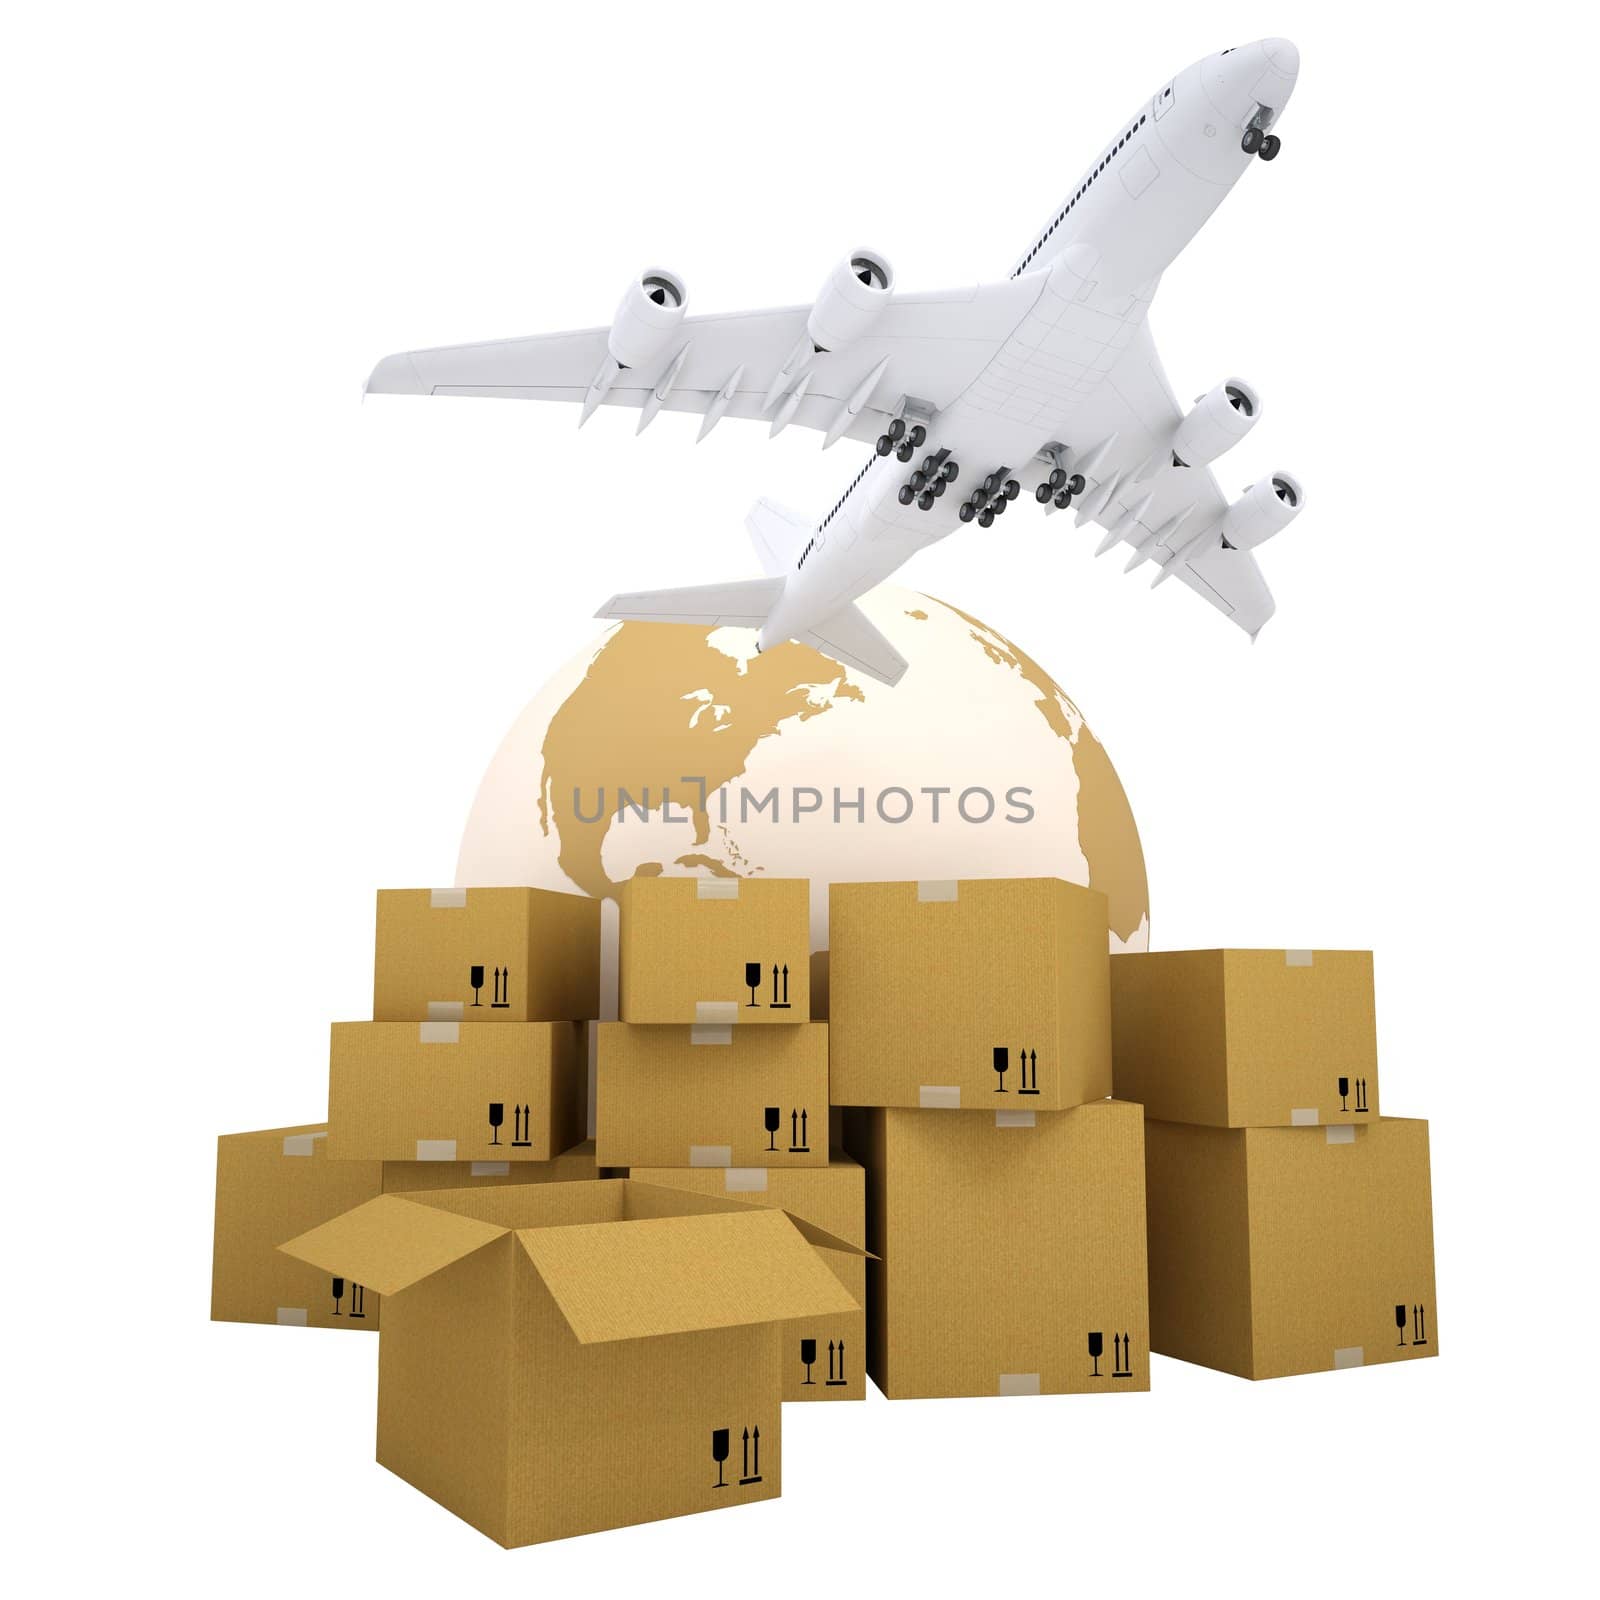 Earth, cardboard boxes and the plane by cherezoff